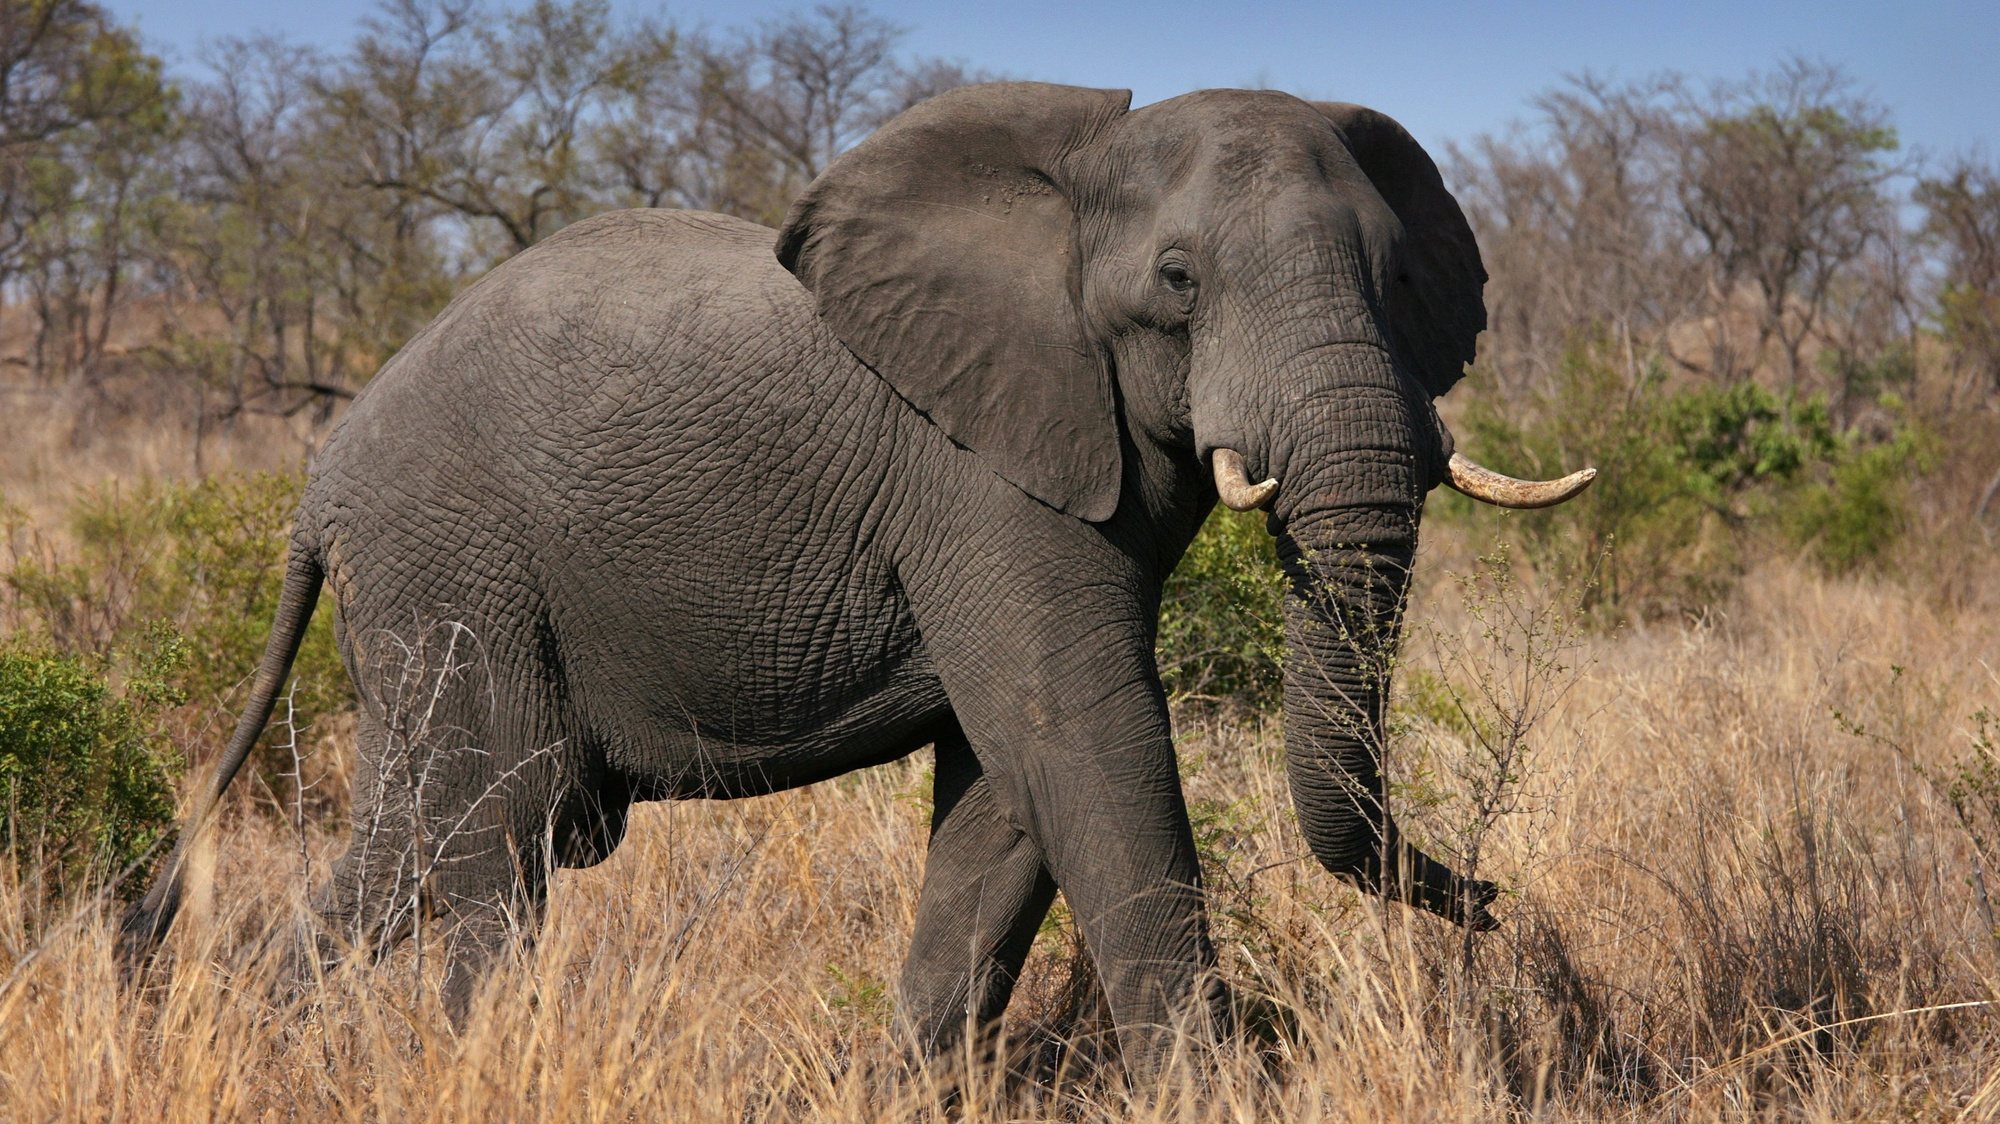 epa01942652 (FILE) A file photograph dated 25 October 2009 shows one of the &#039;Big Five&#039;, an African elephant, in South Africa&#039;s Kruger National Park. South African tourism operators are seeing marketing gold in the Soccer World Cup, a chance to sell the country as a destination to foreign travellers long after the games are over. Gateway Tours and Safaris, which saw 70% of its reservations cancelled for 2009, said the tournament represented a marketing opportunity that could help the industry recover from a dismal year with bookings hit by the global economic crisis. The draw for the FIFA World Cup 2010 takes place in Cape Town on 04 December 2009.  EPA/JON HRUSA